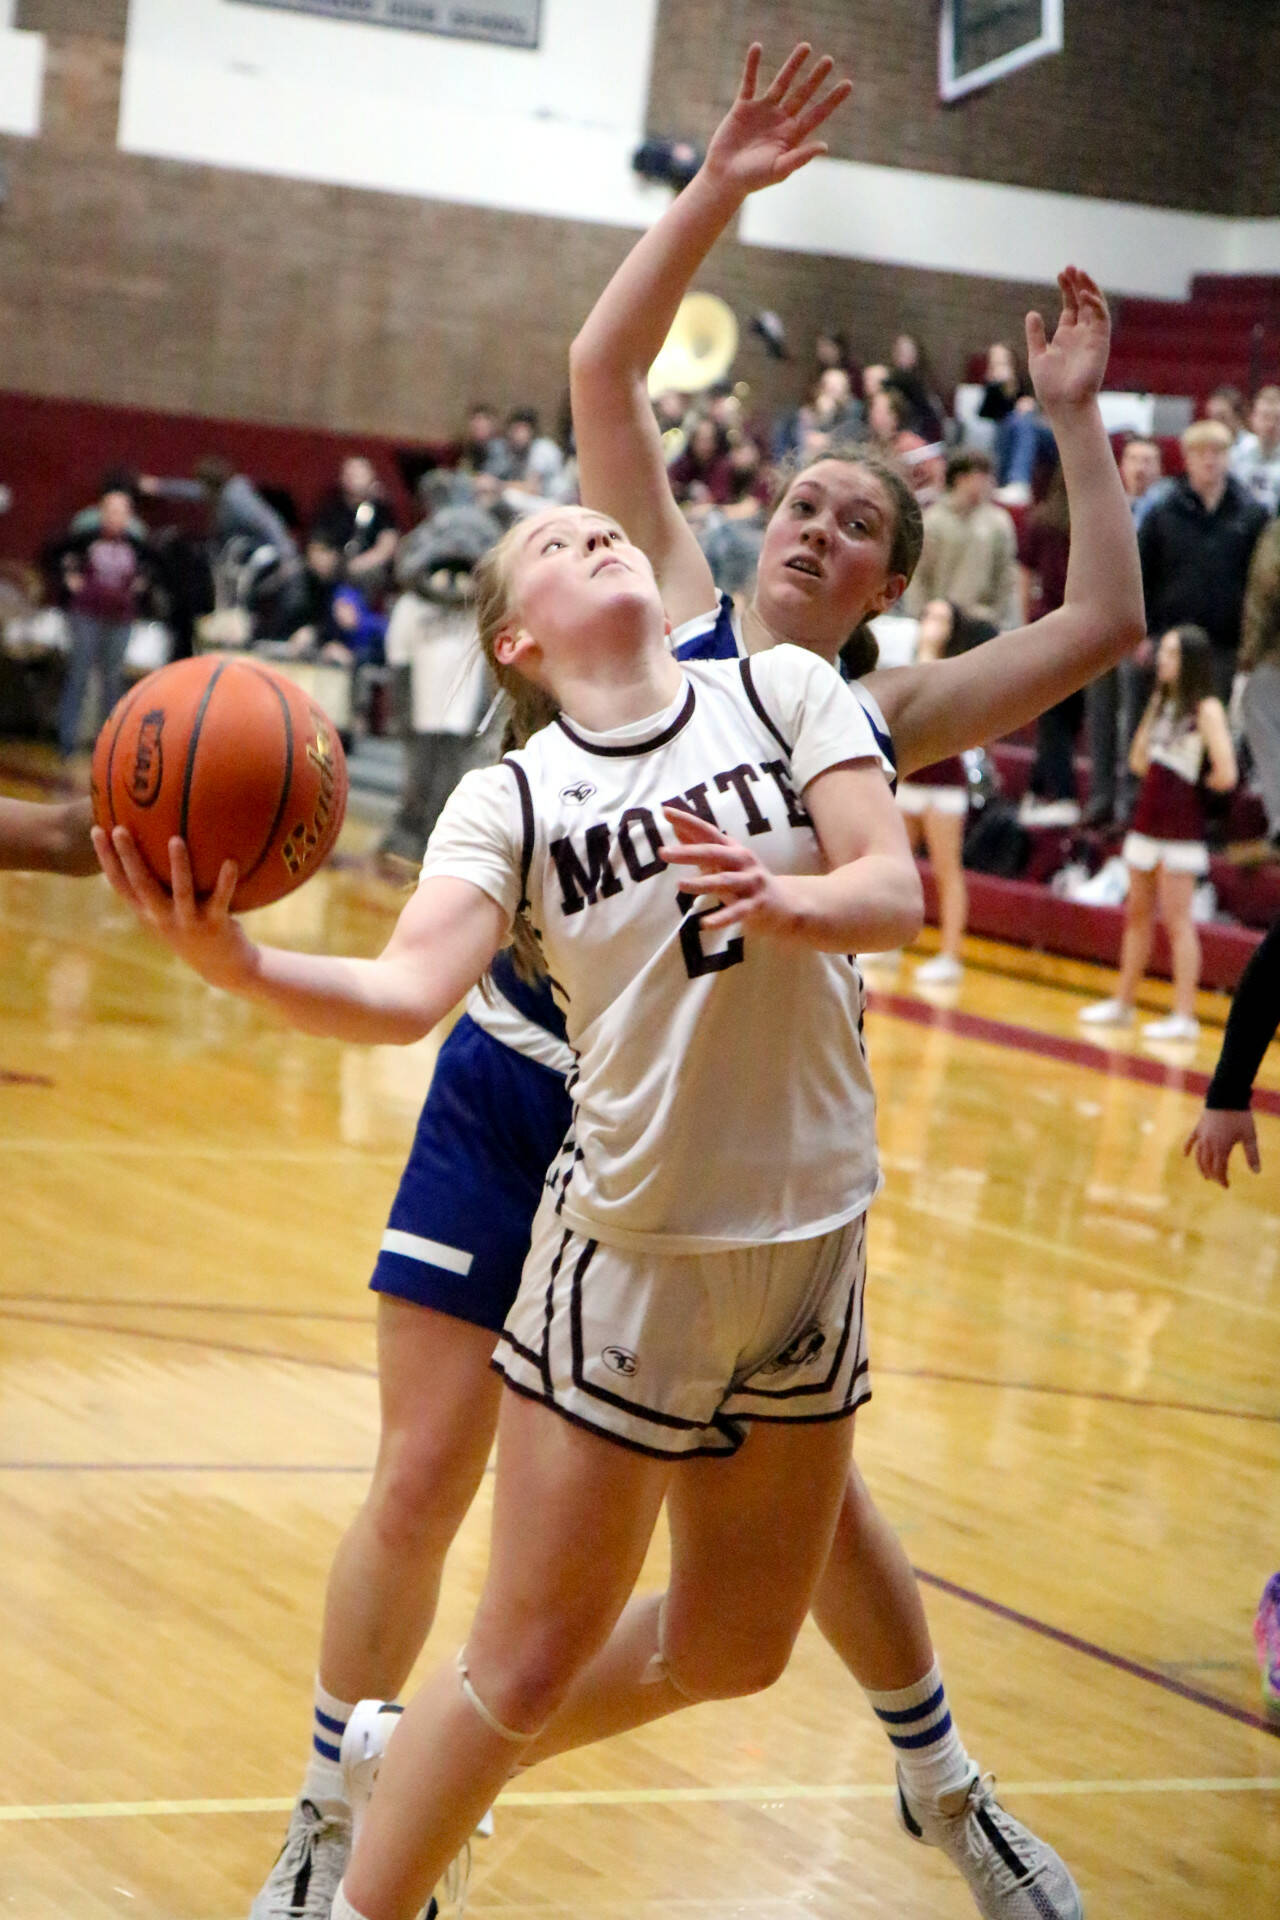 RYAN SPARKS / THE DAILY WORLD Montesano’s Tieander Olson (2) drives the lane against Elma’s Olivia Moore during the Bulldogs’ 37-22 win in a 1A District 4 semifinal game on Saturday in Montesano.